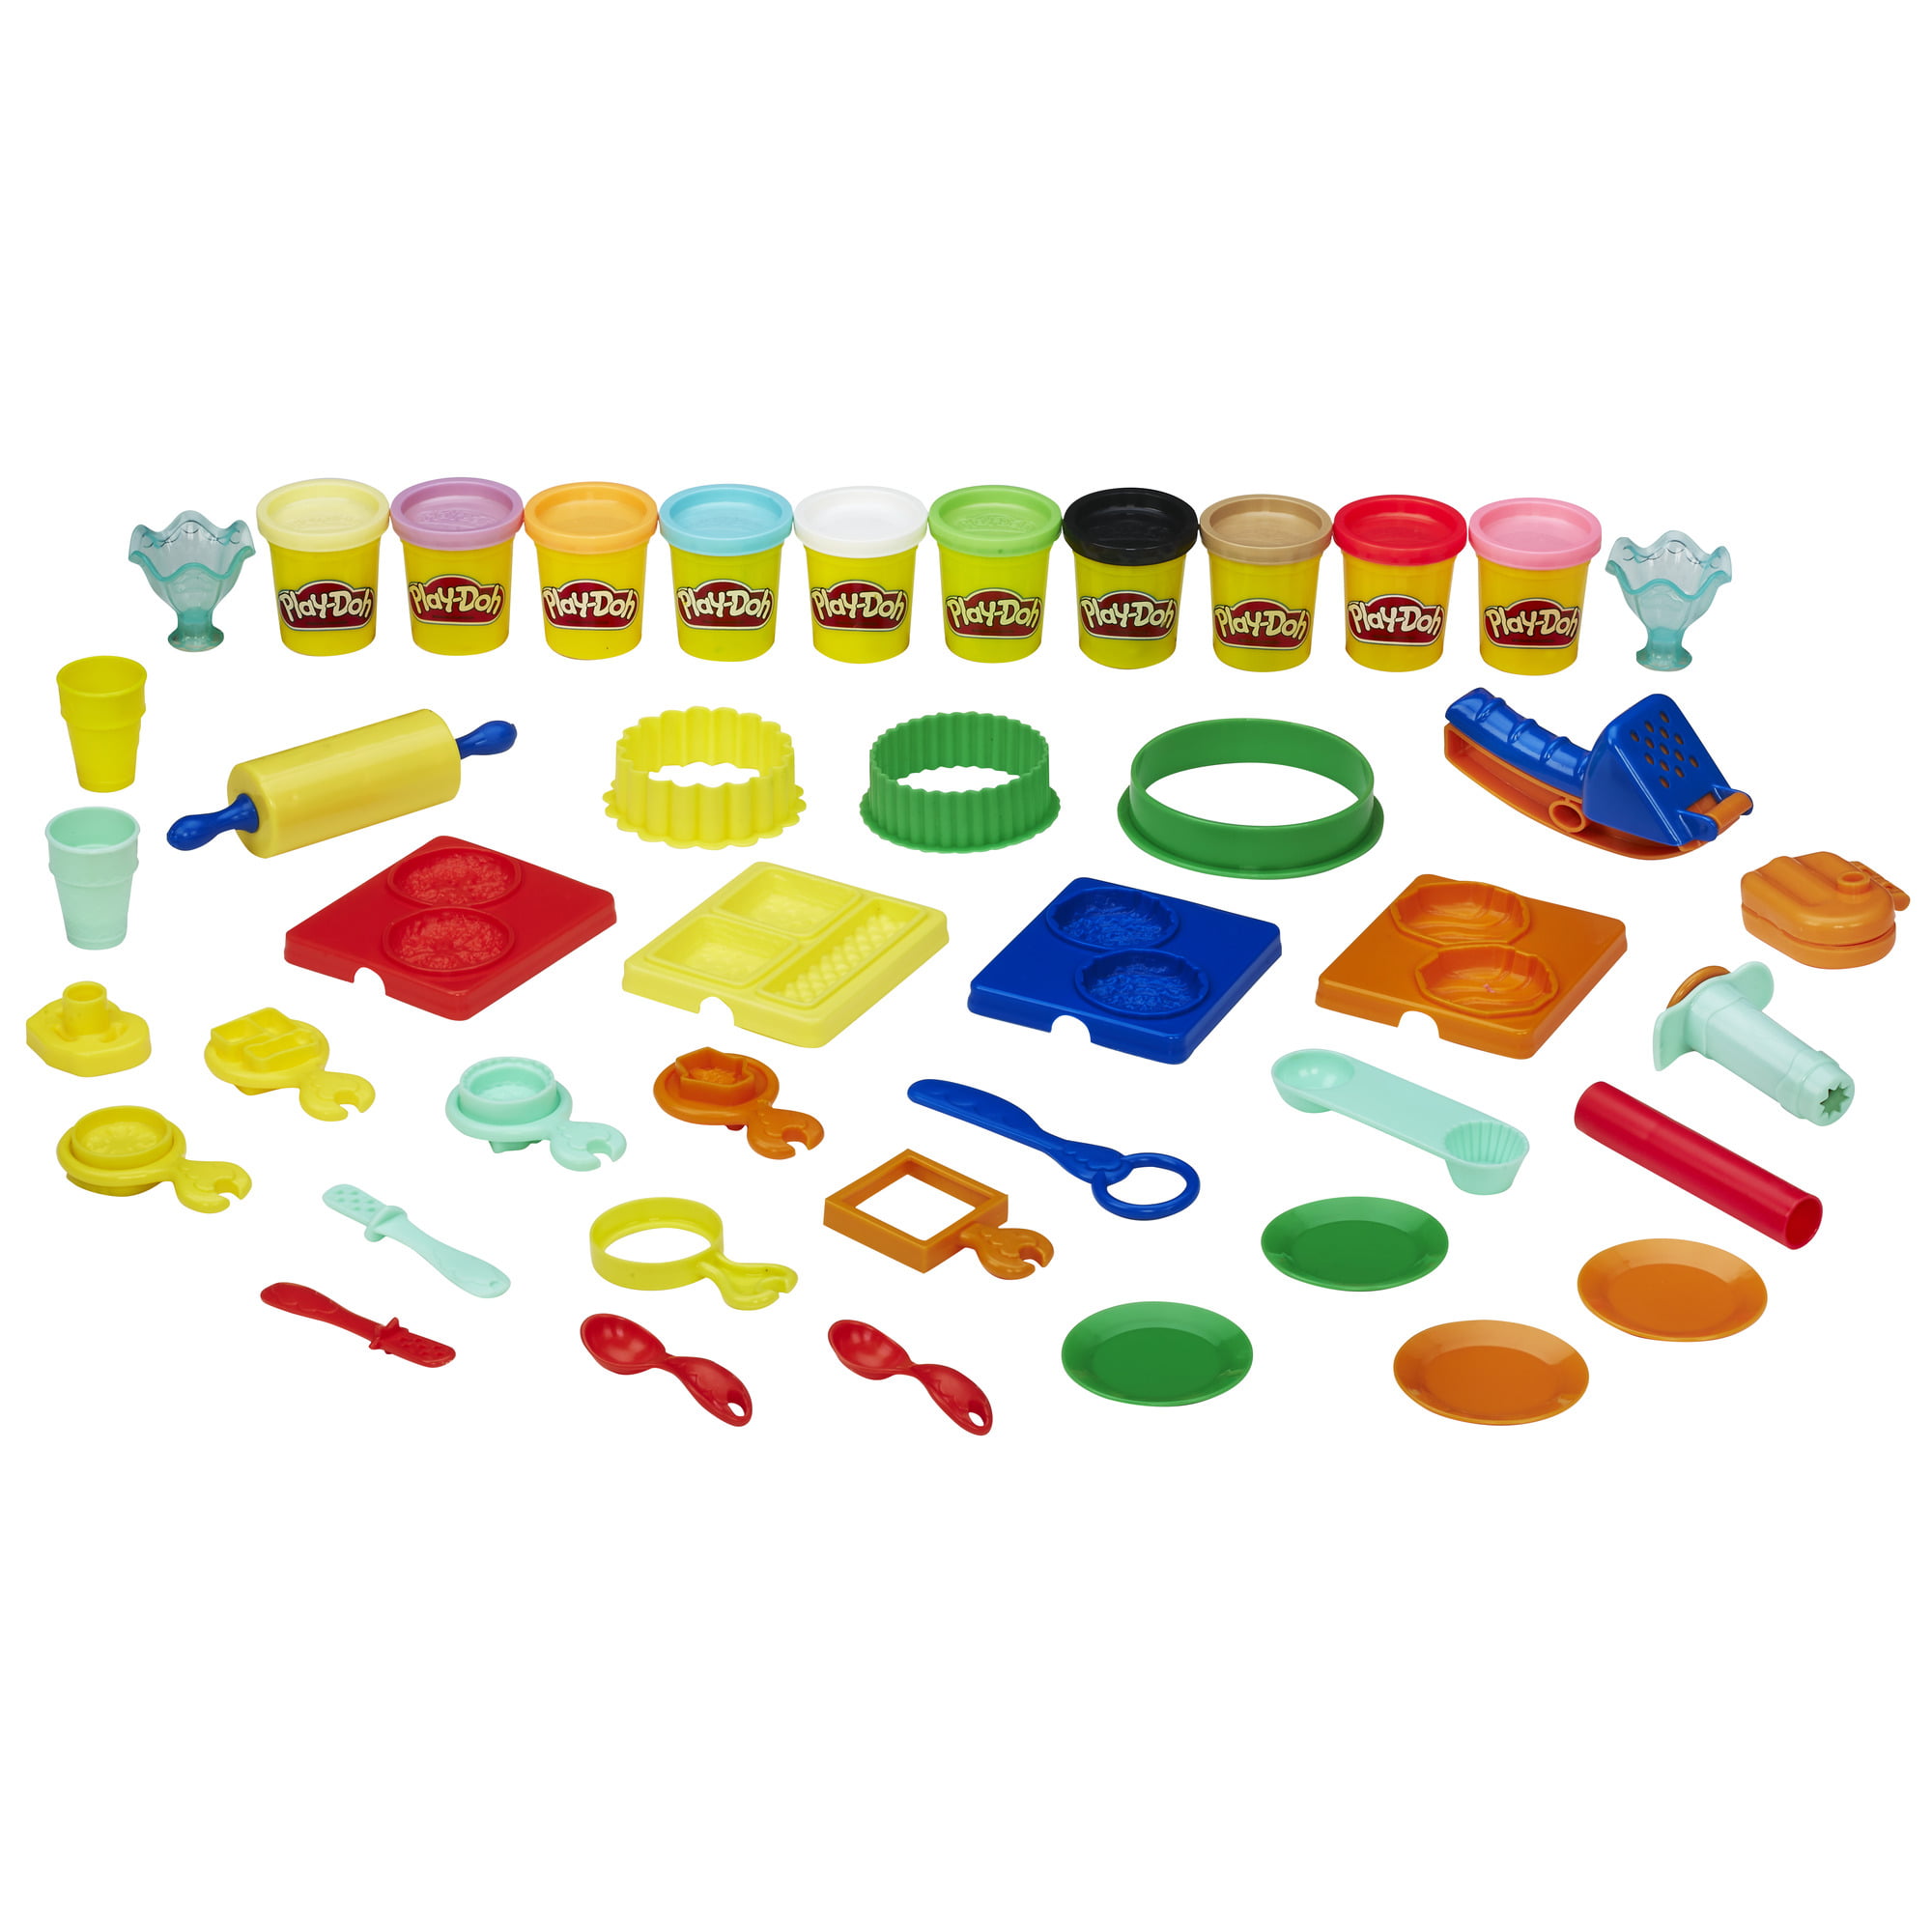 Play-Doh Play 'n Store Table Toy, Arts & Crafts Activities for Kids 3 Years  & Up, Over 25 Play-Doh Accessories, 8 Modeling Compound Colors (